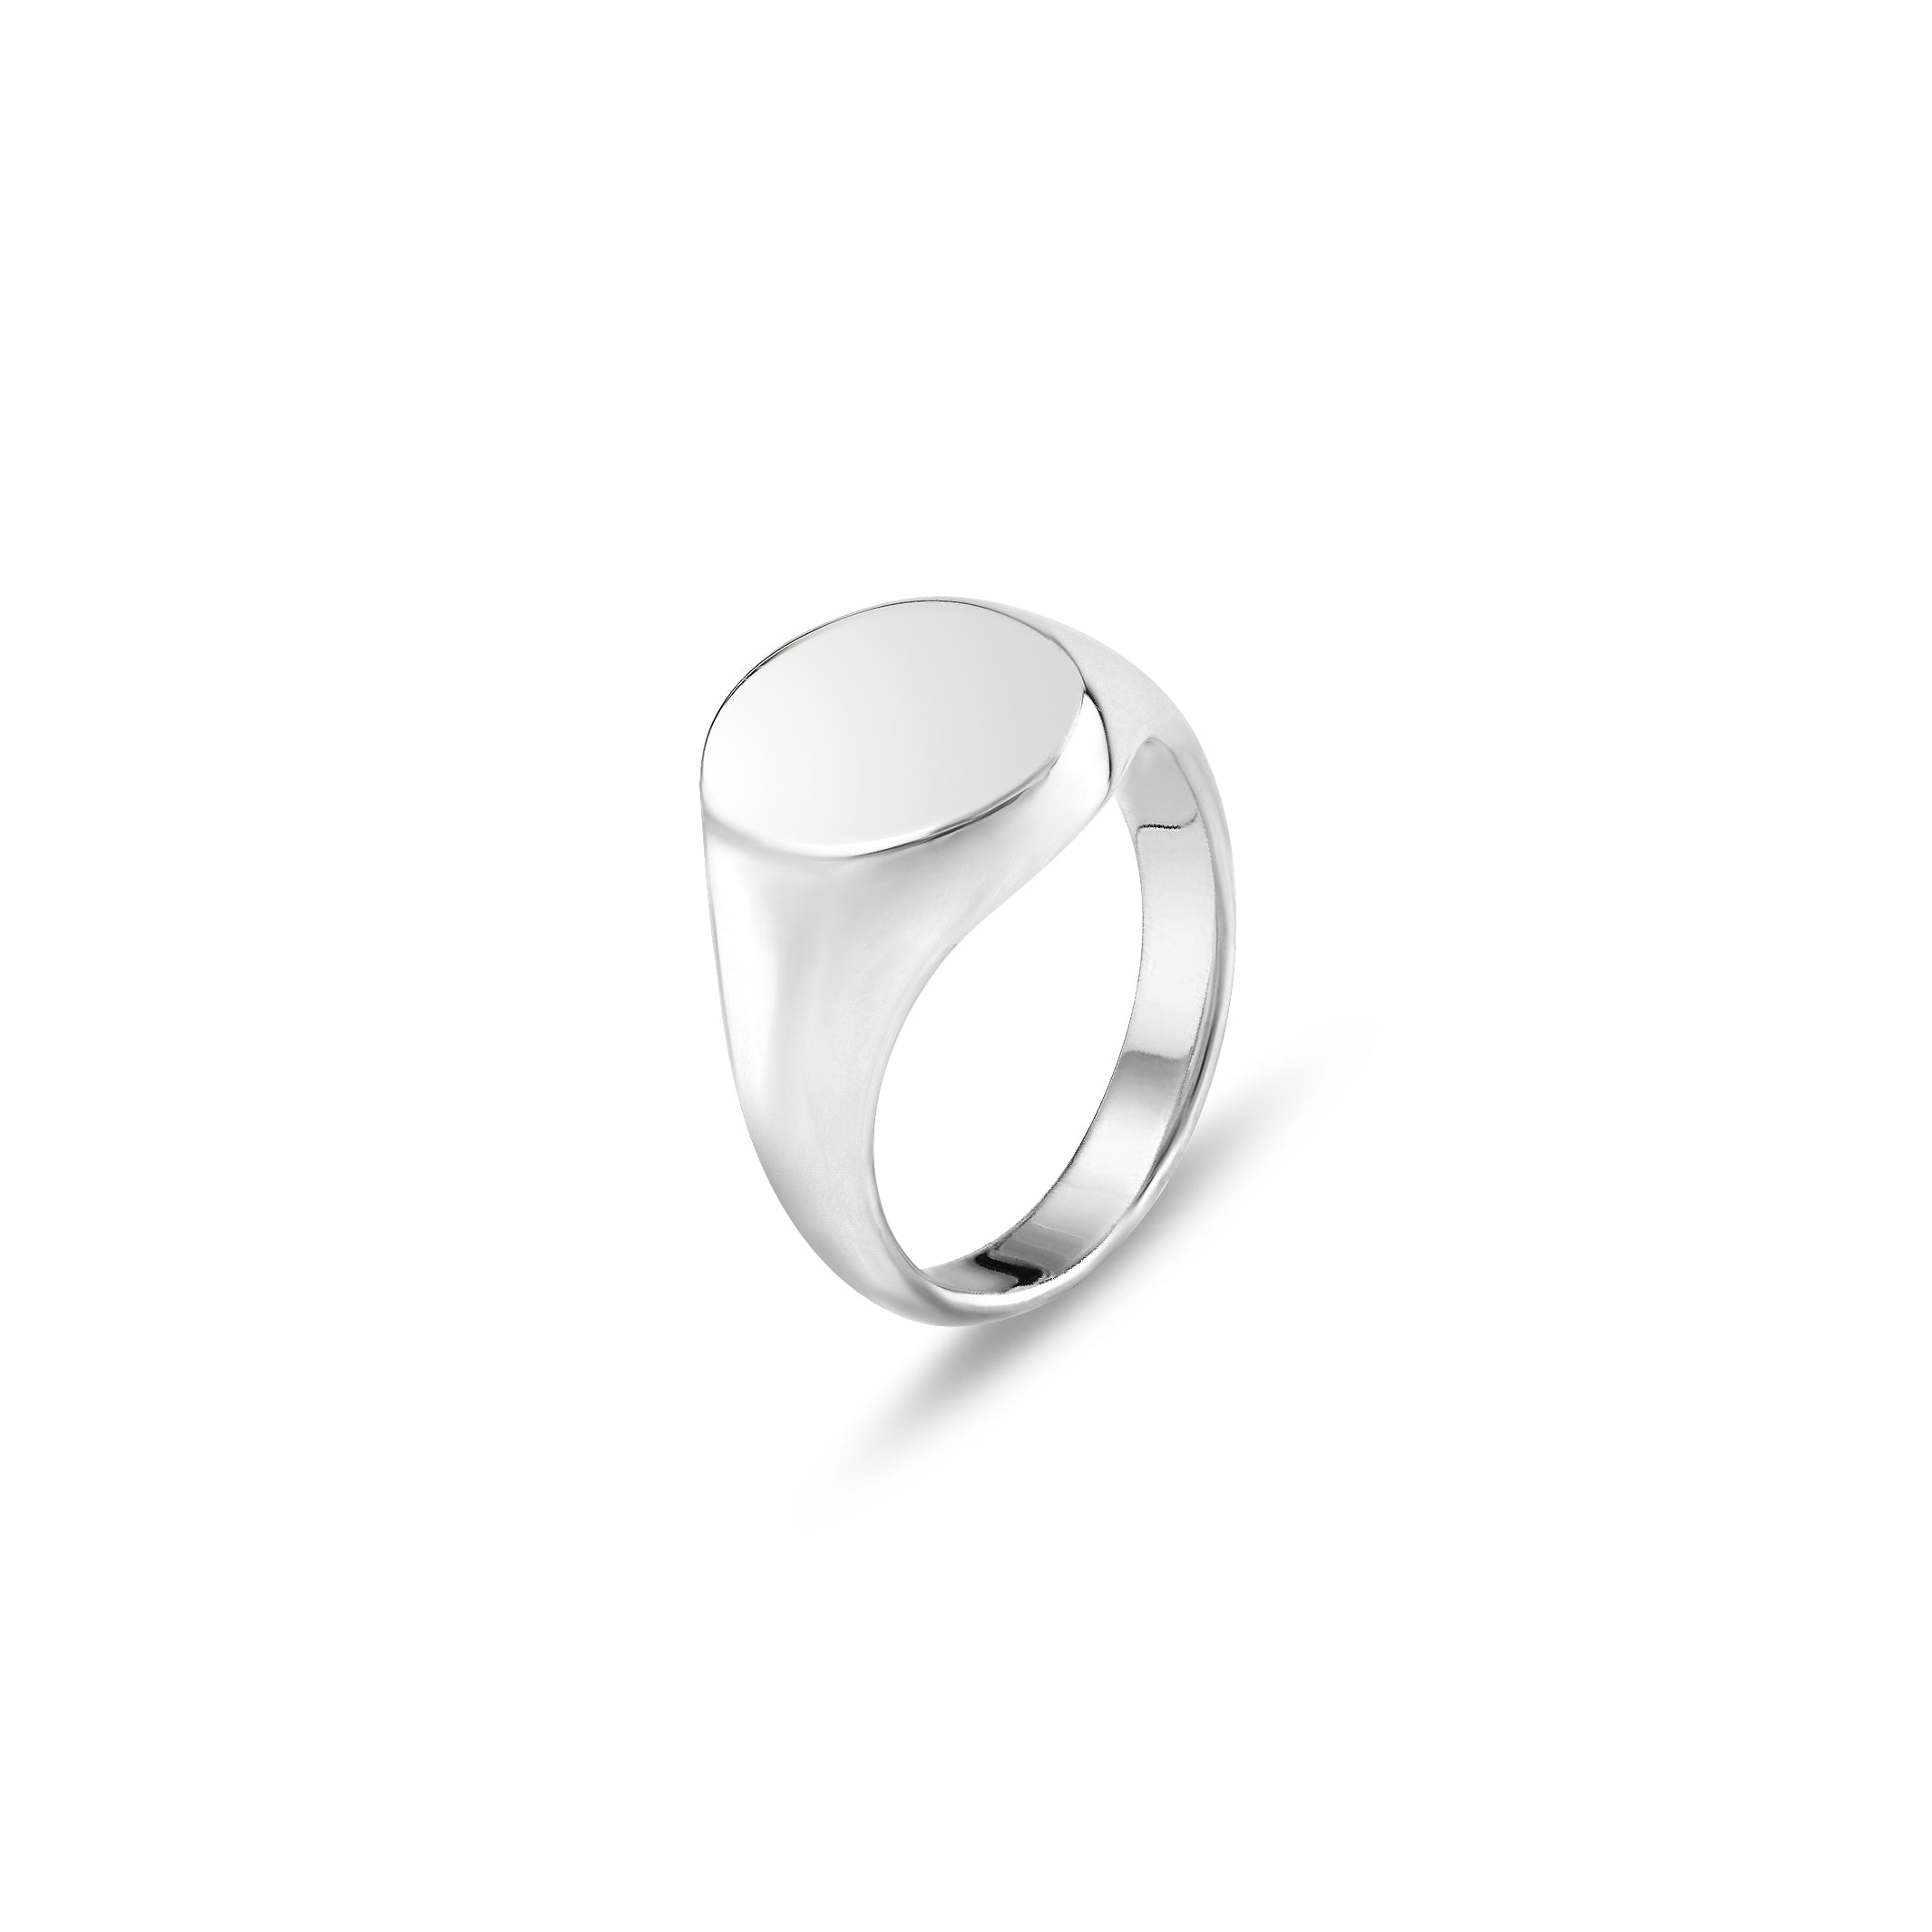 Silver 14 x 12mm Oval Signet Ring